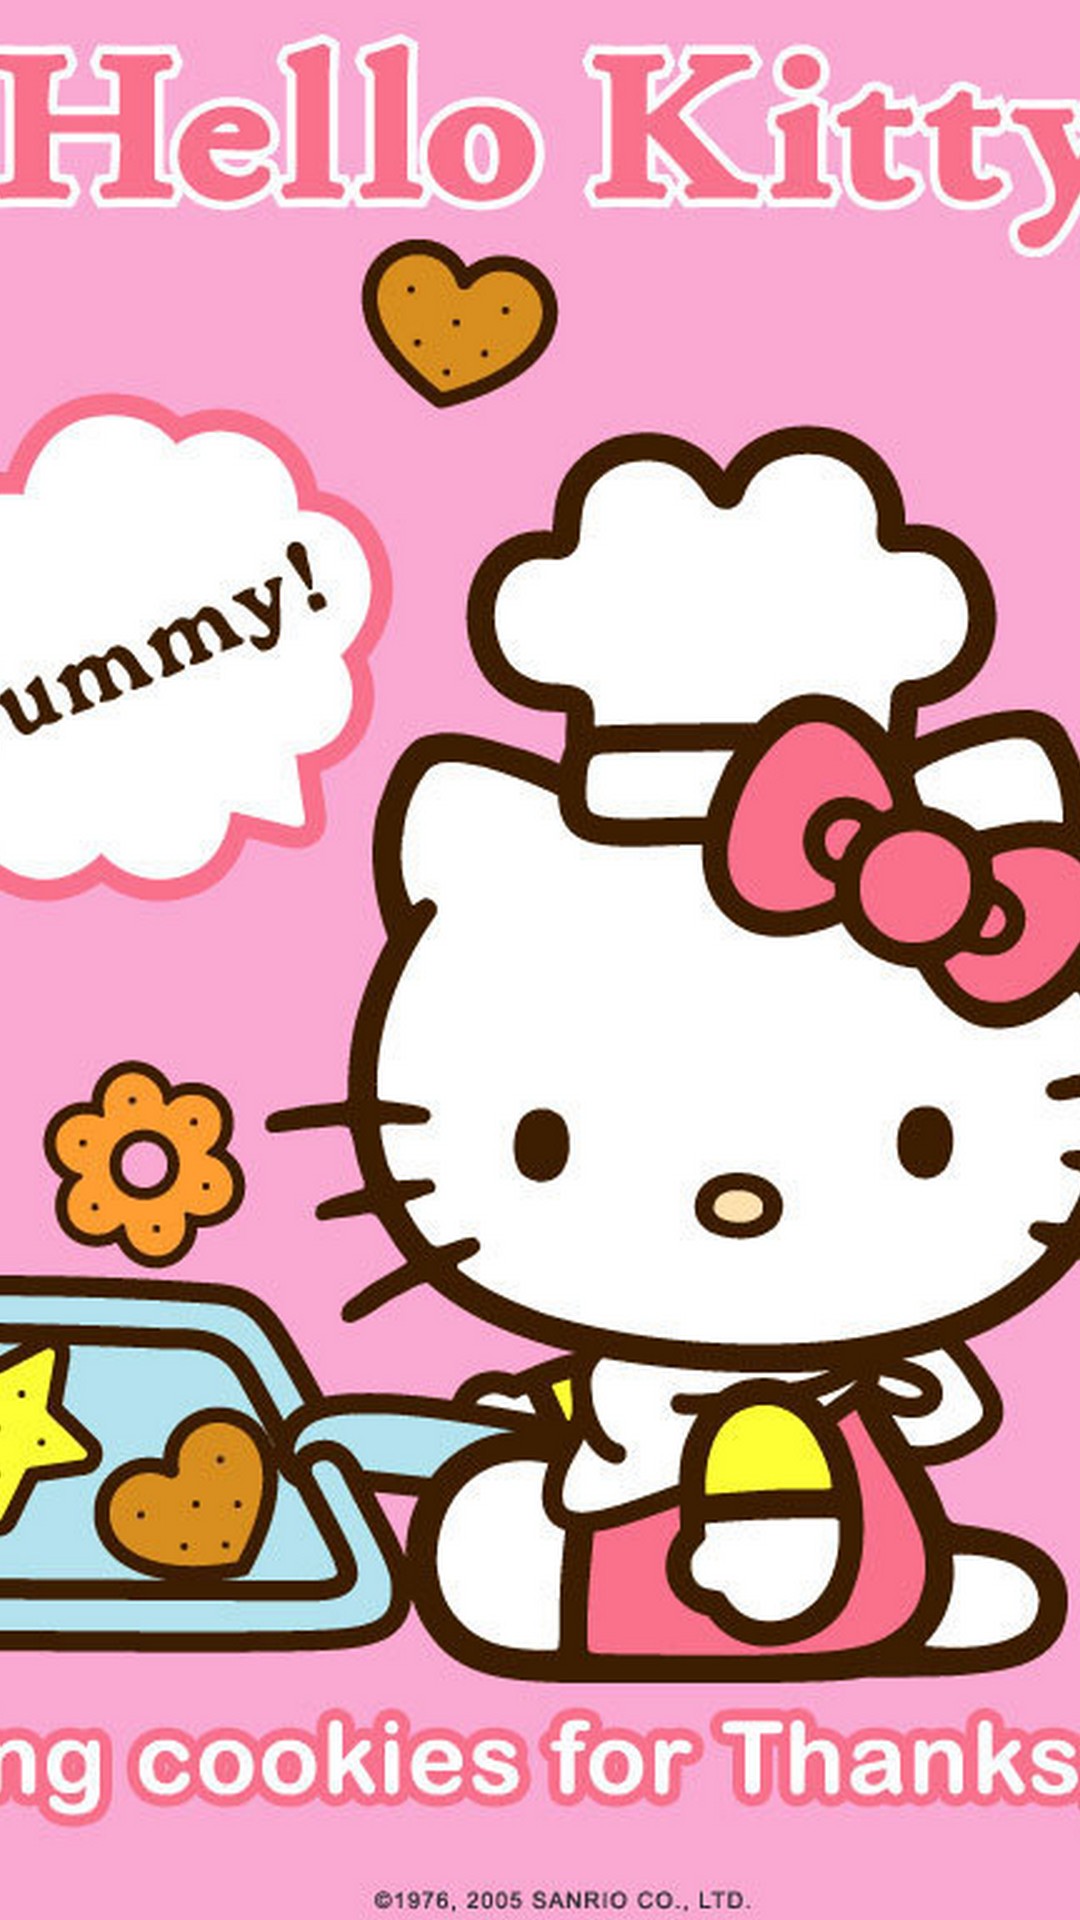 Iphone Wallpaper Hello Kitty Pictures With Image Resolution - Hello Kitty - HD Wallpaper 